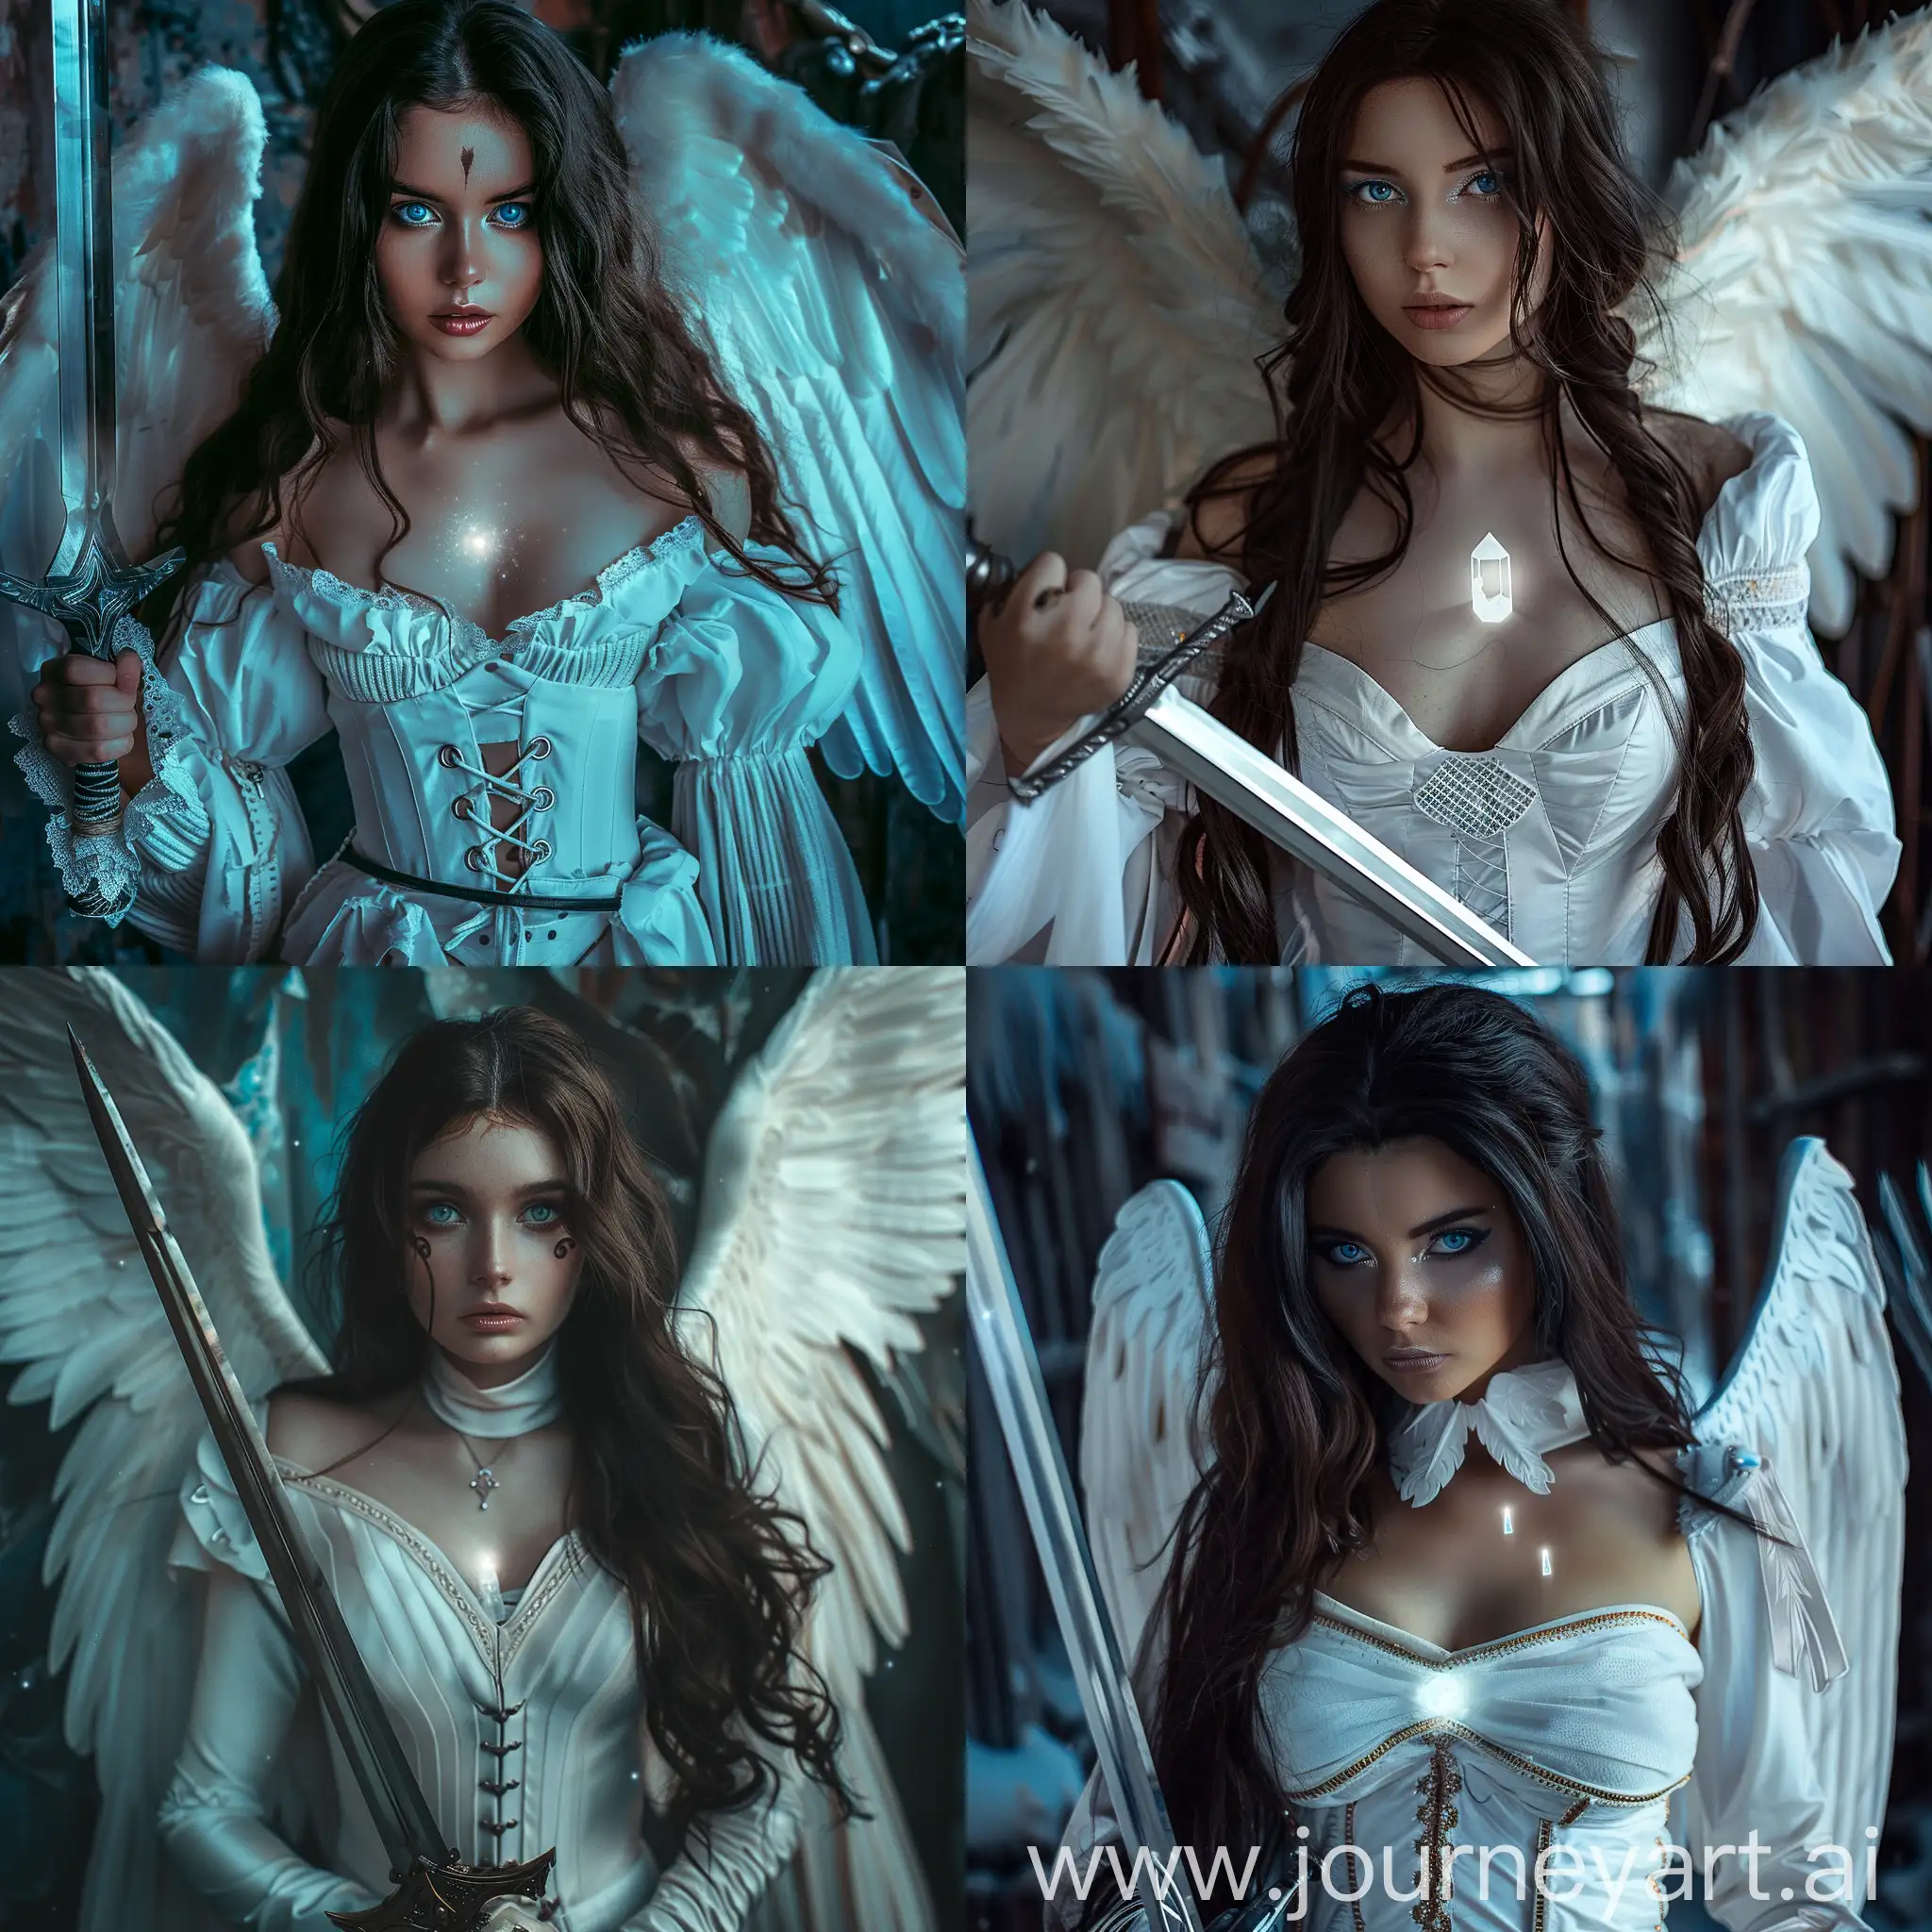 A captivating, ultra-realistic photo of a feminine warrior with angel wings dressed in white Gothic-inspired attire, showcasing her lean. Her long, dark hair flows elegantly, and her intense blue eyes draw the viewer in. With a bold Gothic makeup look, she wields a sword in one hand, exuding a powerful and seductive aura. The dark fantasy setting, with its gloomy atmosphere, envelops her otherworldly presence, making her the focal point of the image, Little light crystal on her chest, photo, dark fantasy